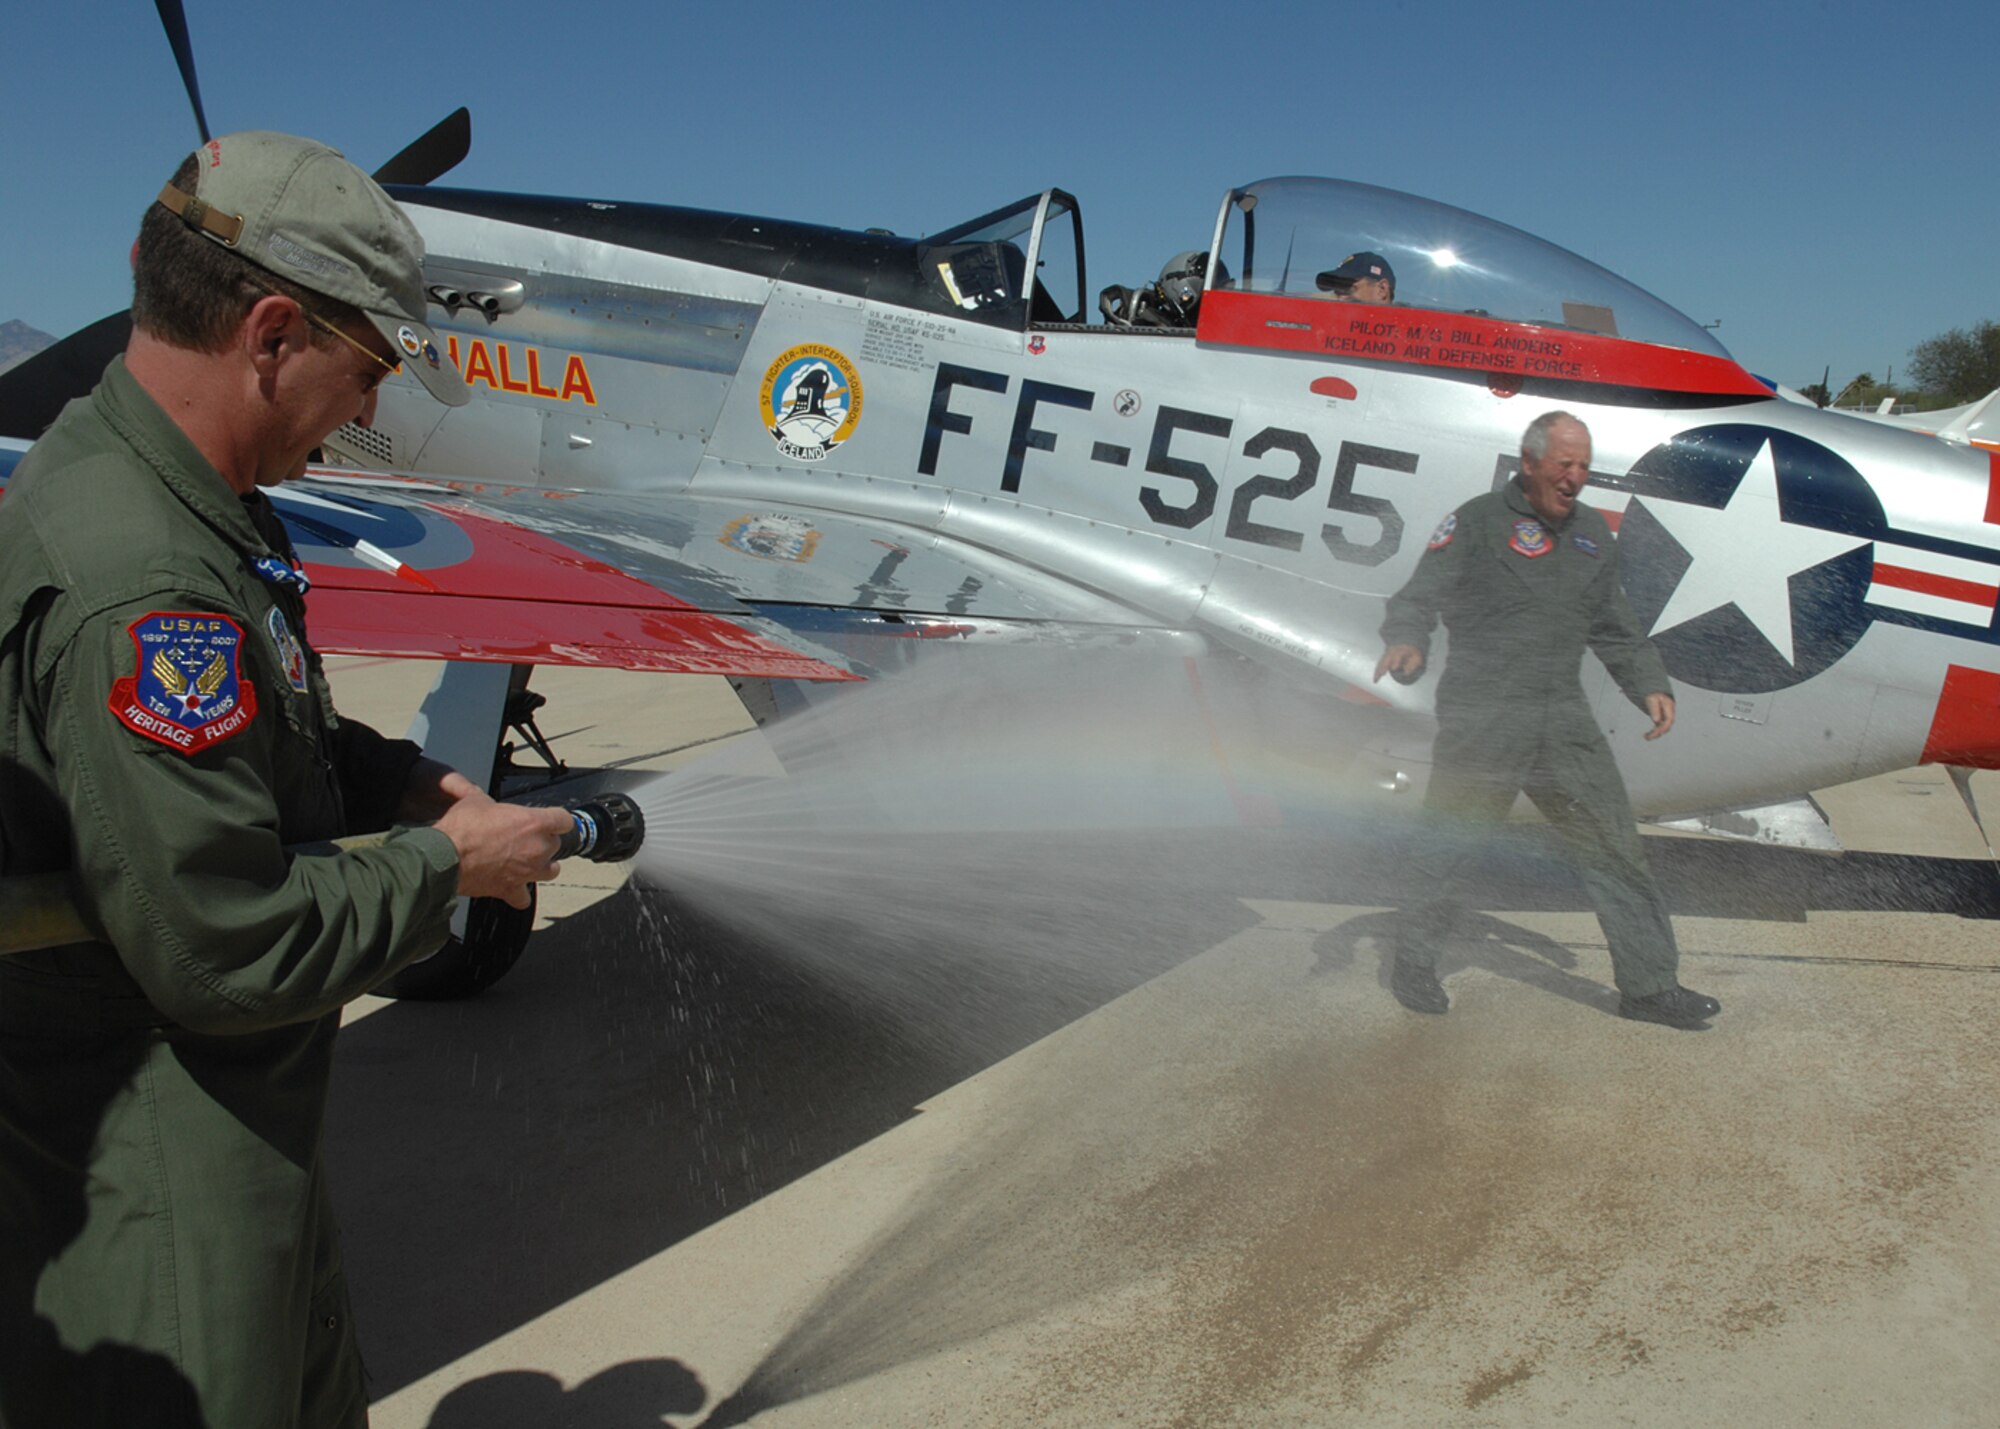 Greg Anders sprays his father, Maj. Gen. (Ret.) Bill Anders with the fire hose after completing his last flying mission in a P-51 Mustang during the Heritage Conference at Davis-Monthan Air Force Base, Arizona on March 7, 2008. General Anders was at D-M to make the conference his last flying experience.  With tradition after a pilot has finished their flying status a person sprays them with a fire hose and their career is honored.  MG Anders was an astronaut on Apollo 8 which was the first person to have left Earth orbit and traveled the moon.  Also, MG Anders is the President for the Heritage Flight Museum.  The conference is held at D-M every March to train new and old pilots and their teams for the up coming air show season.   (US Air Force photo by Senior Airman Jacqueline Hawkins)
